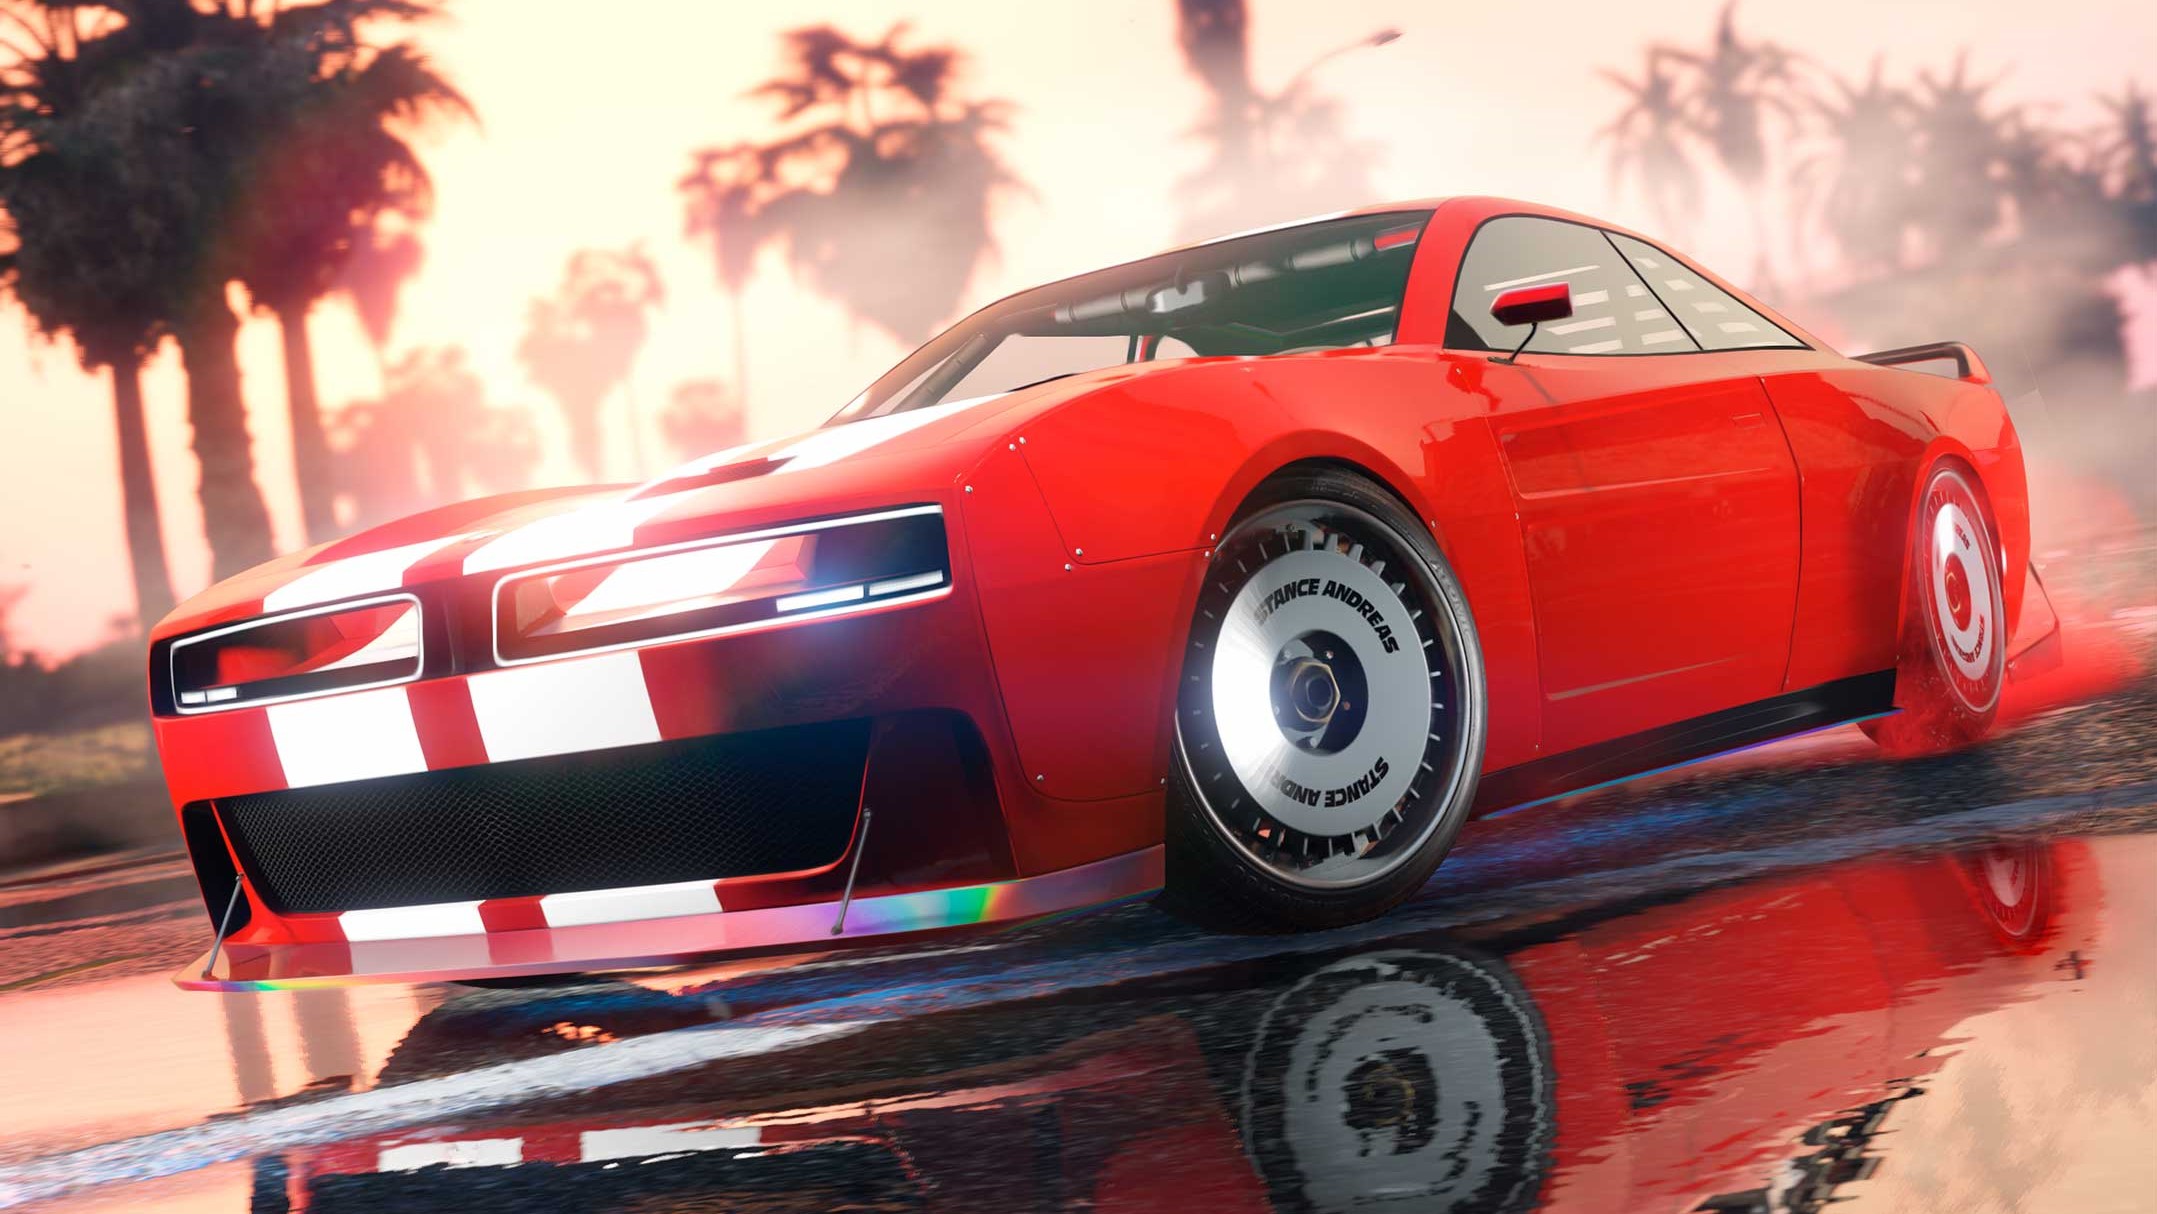 PlayStation removes PS+ requirement for GTA Online for the weekend